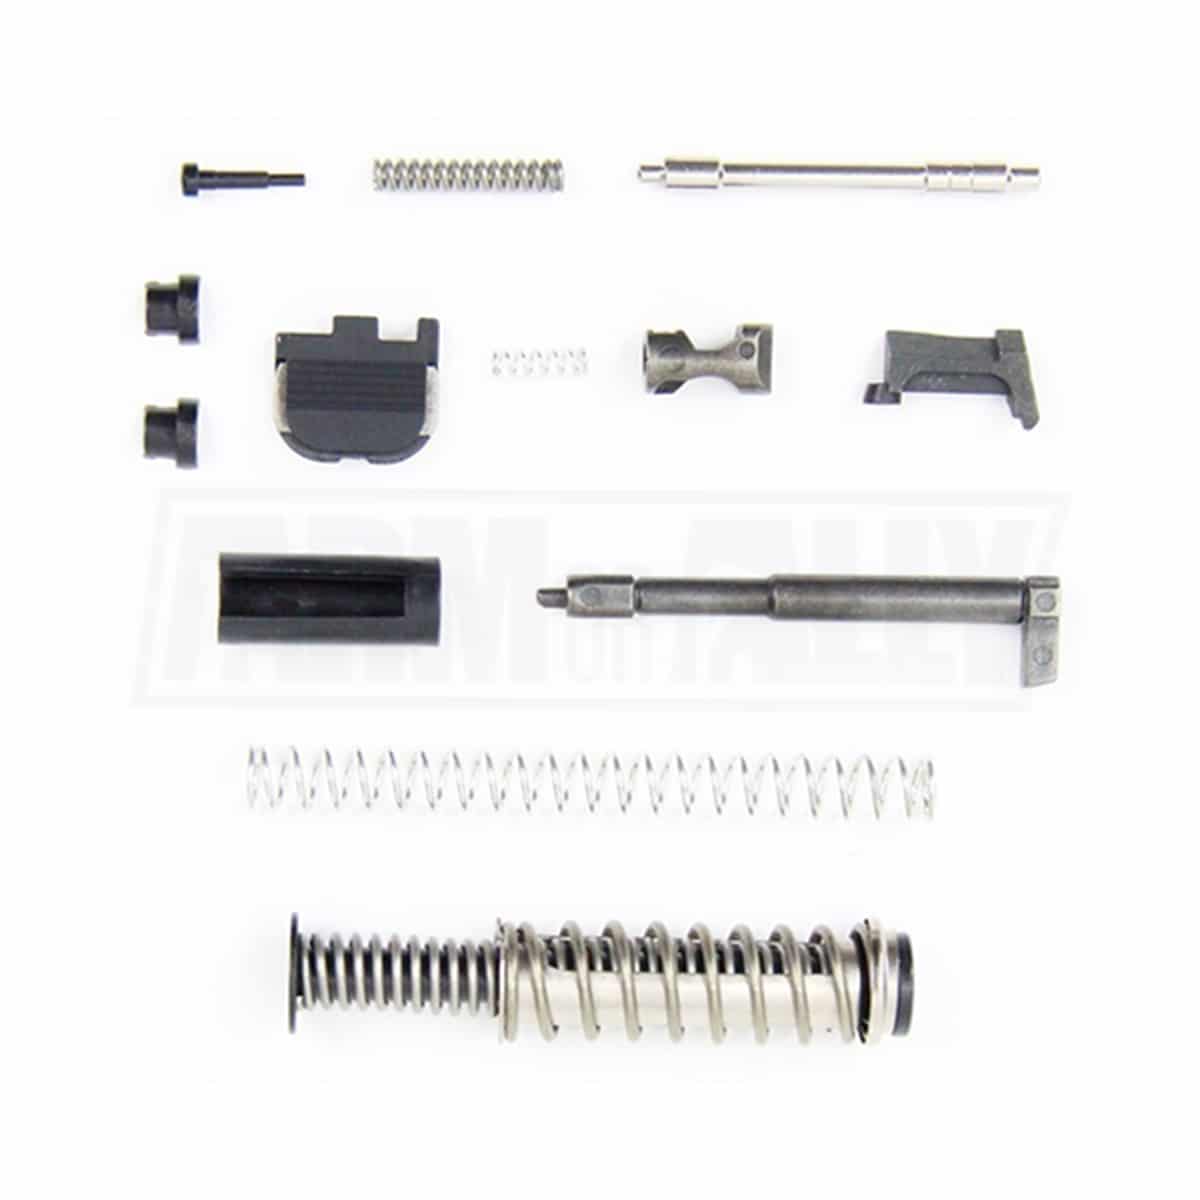 Featured image for “AoA Slide Completion Parts Kit For Glock 43”